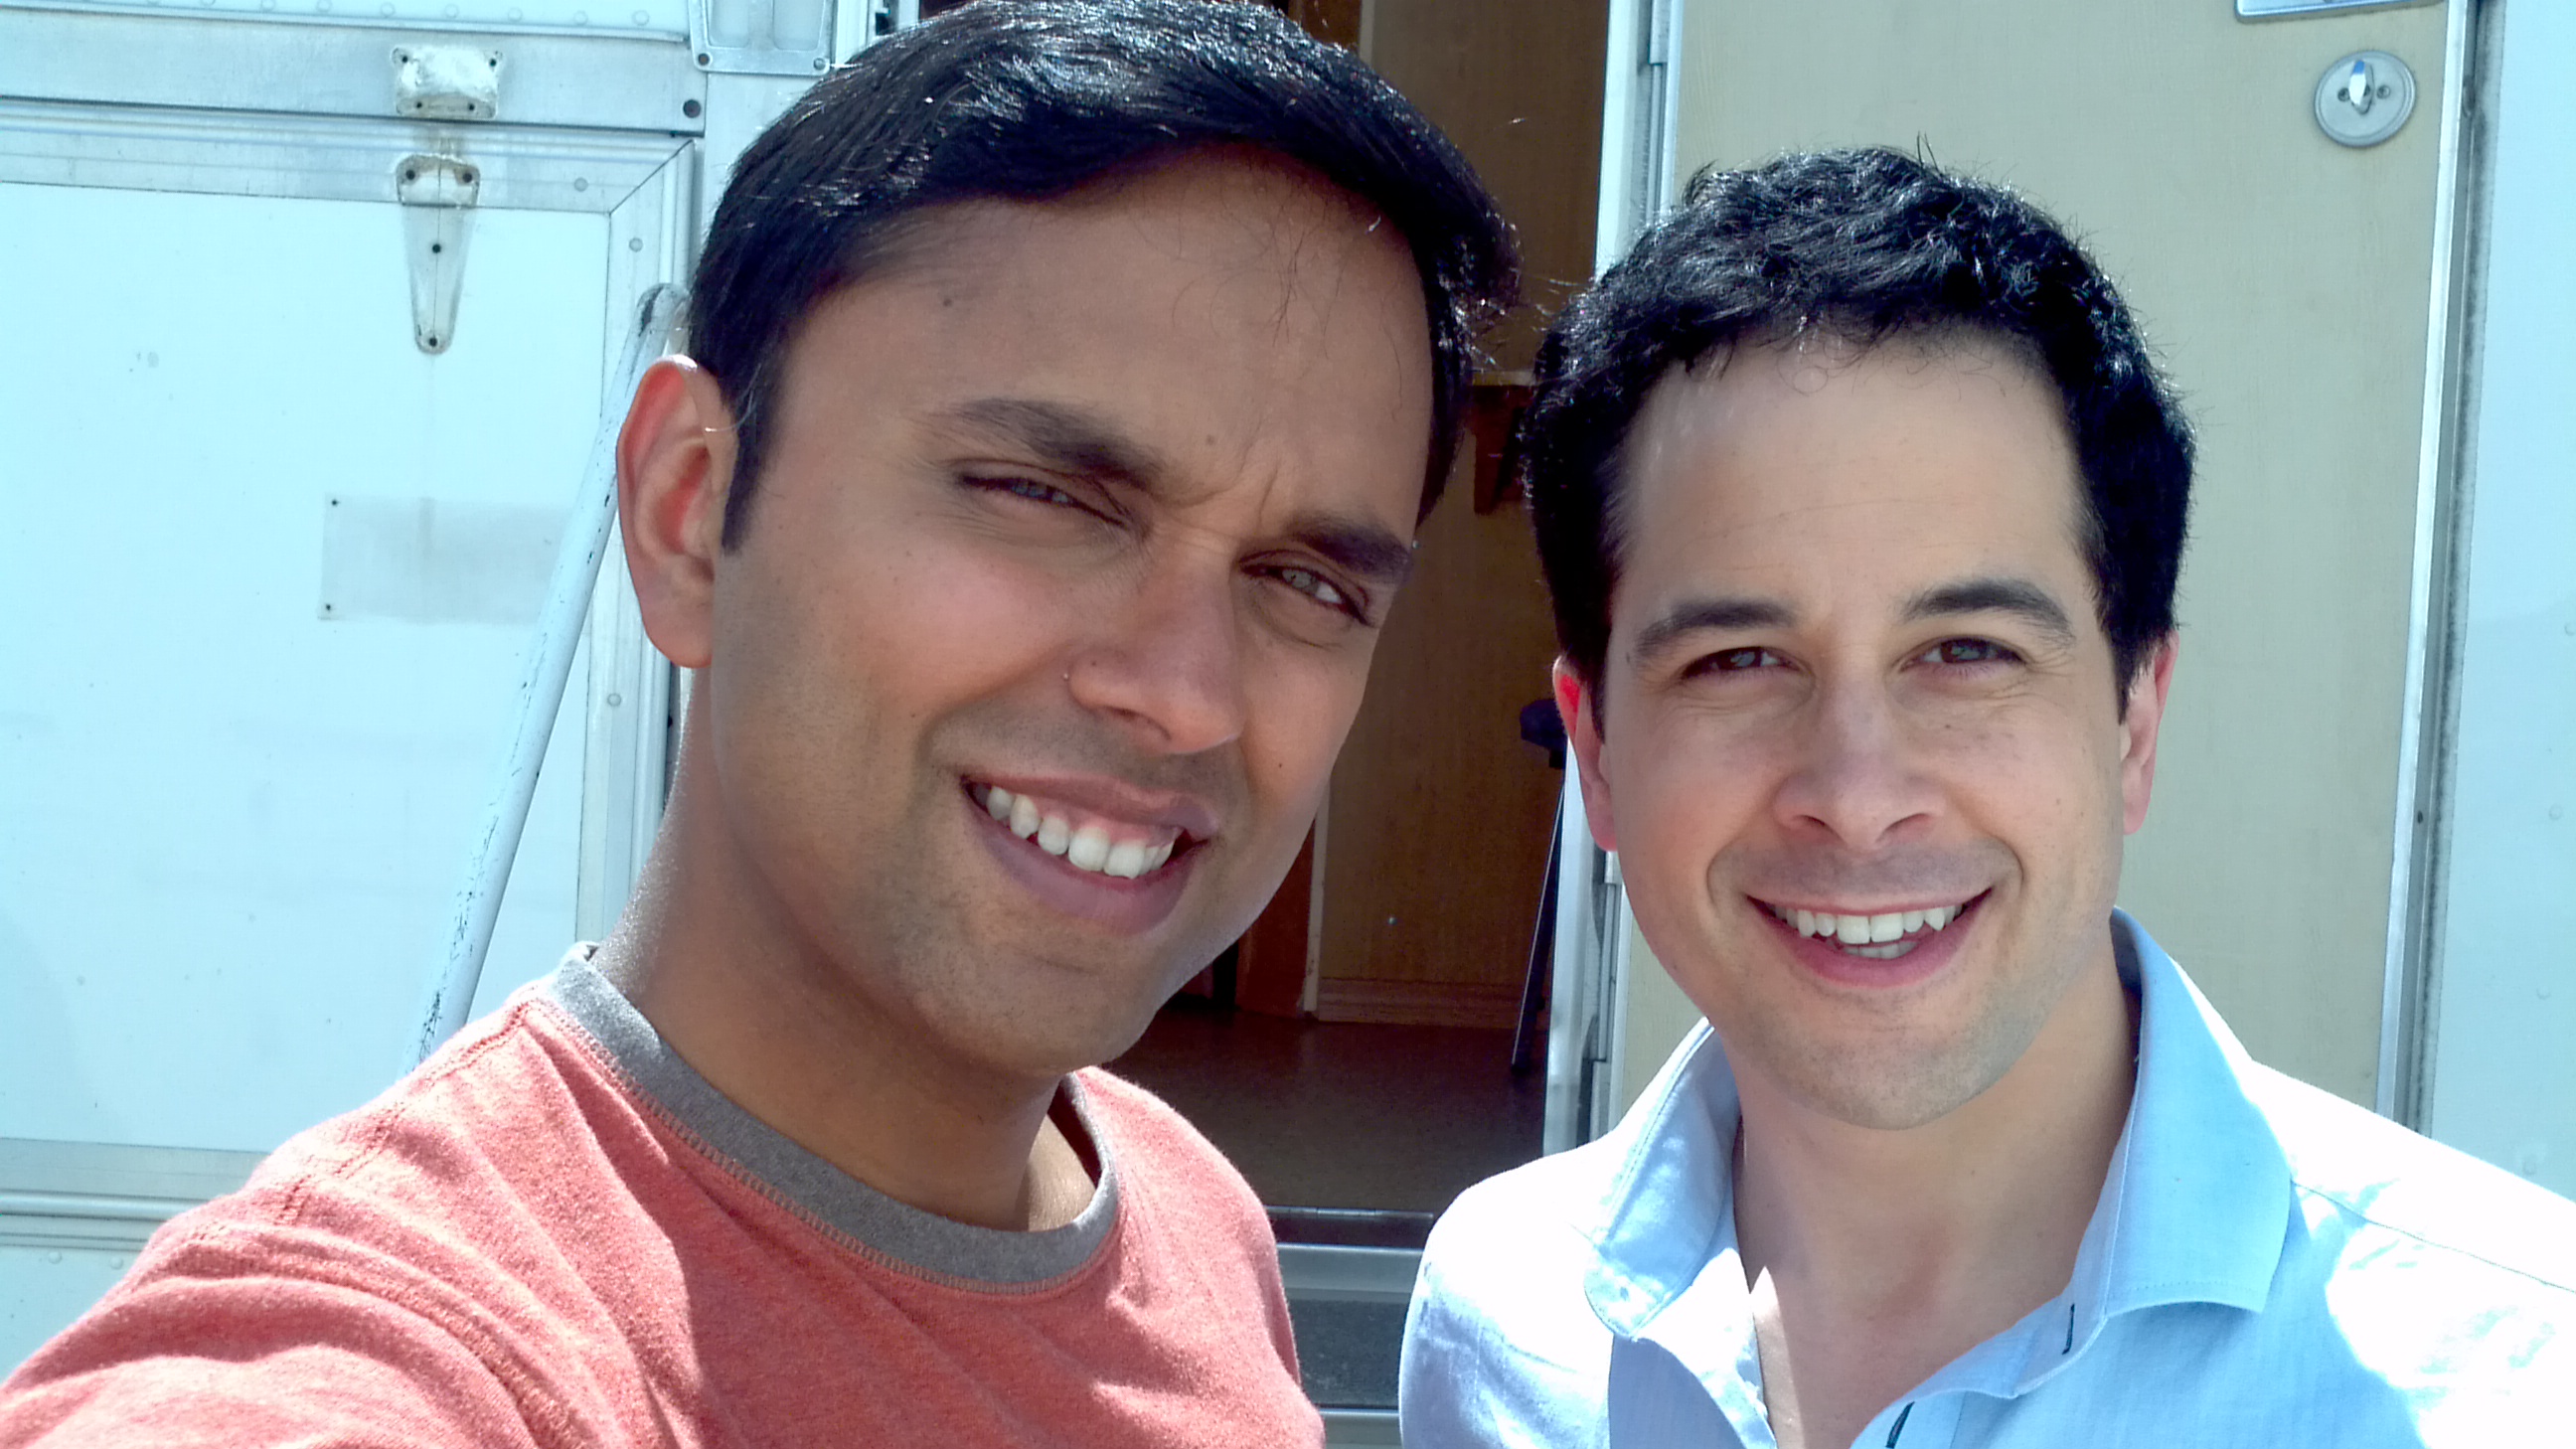 On the set of Drop Dead Diva - with Shane Jacobsen